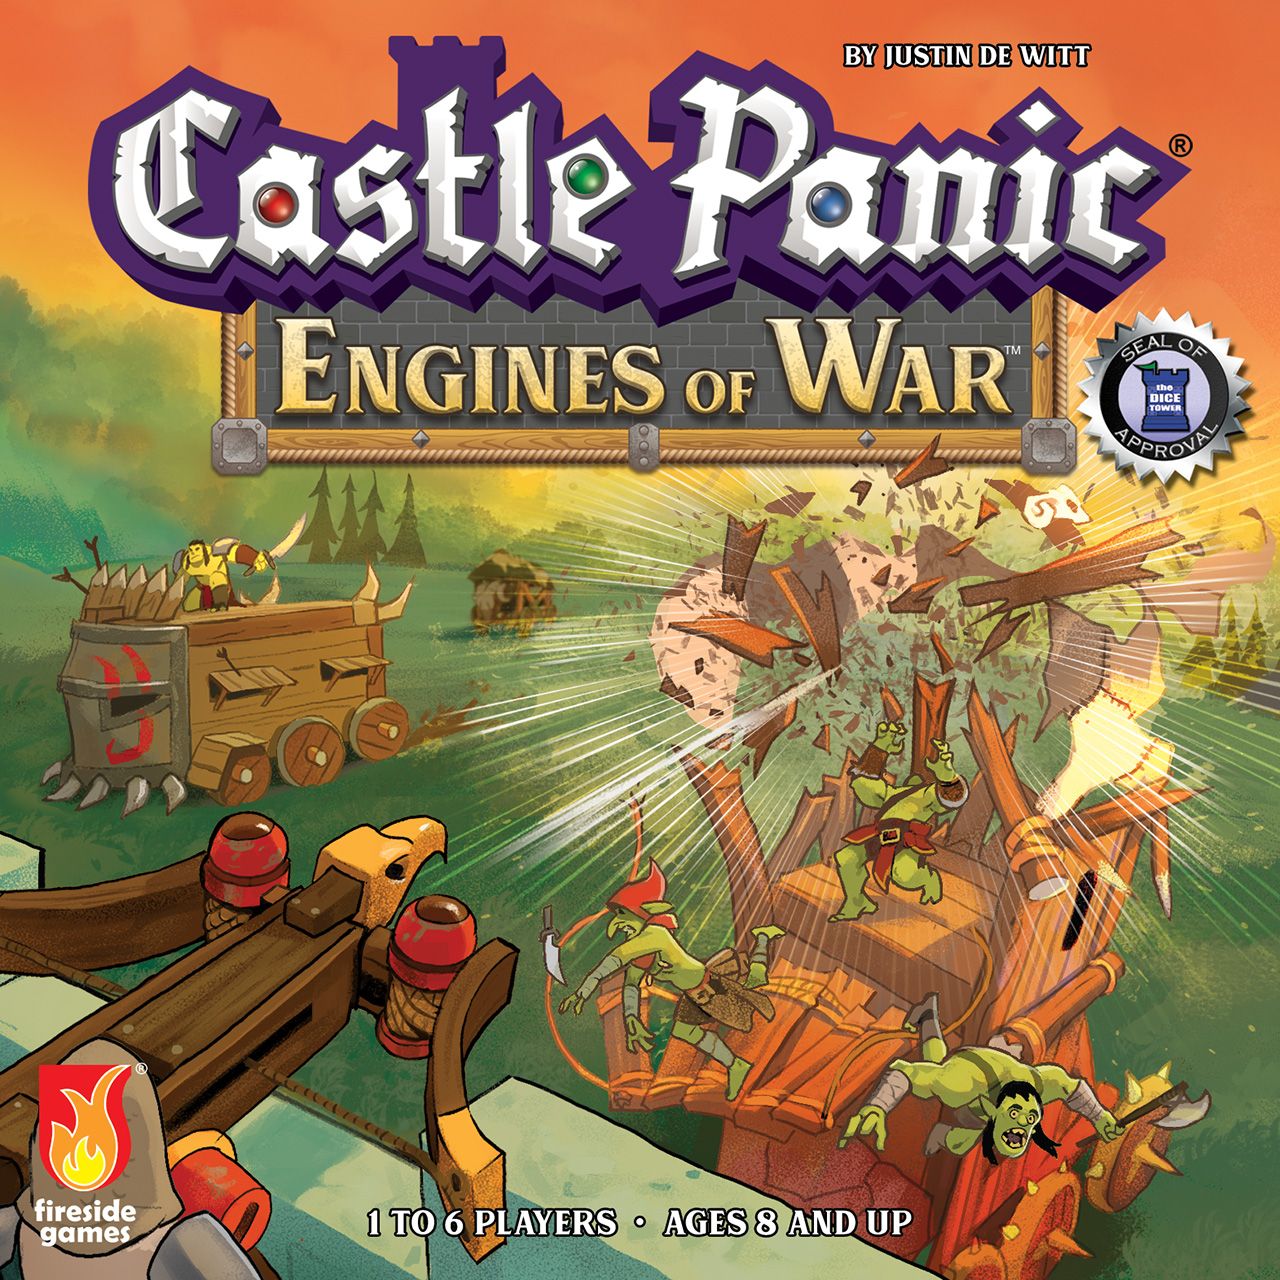 Buy Castle Panic: Engines of War only at Bored Game Company.